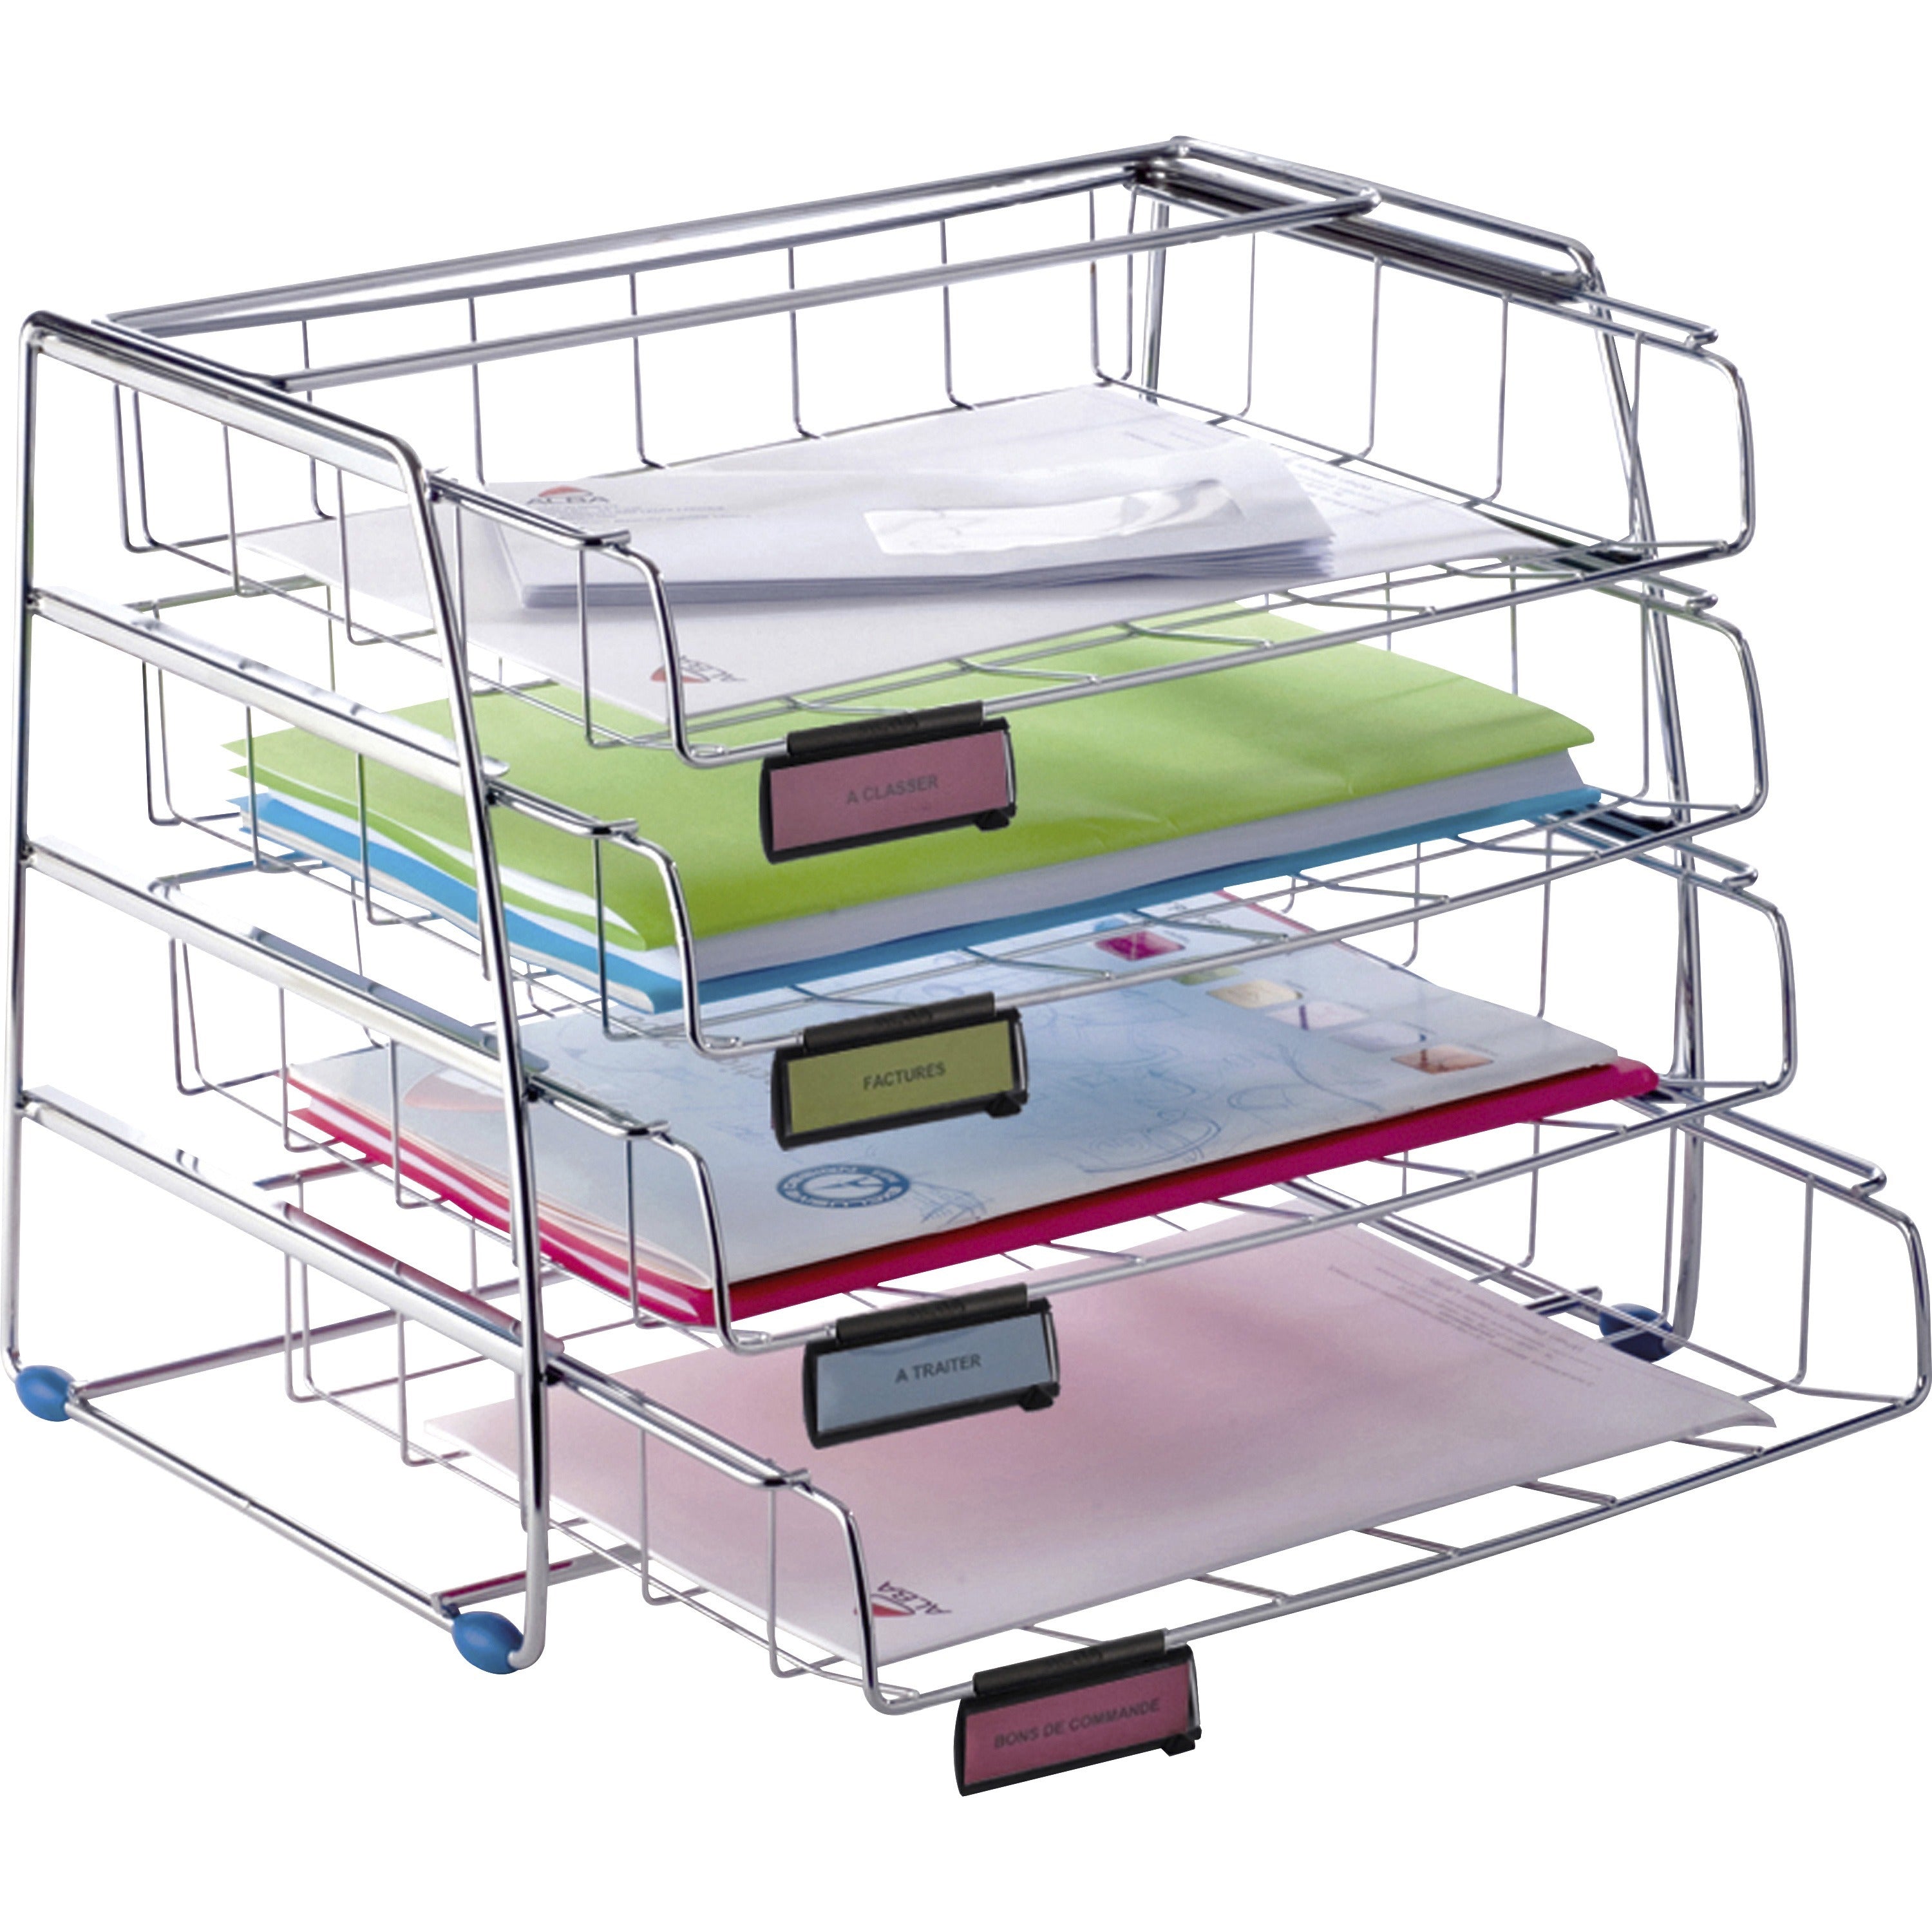 Alba Letter Tray - 4 Tier(s) - 12.4" Height x 12.2" Width15.4" Length - Chrome - Metal - 1